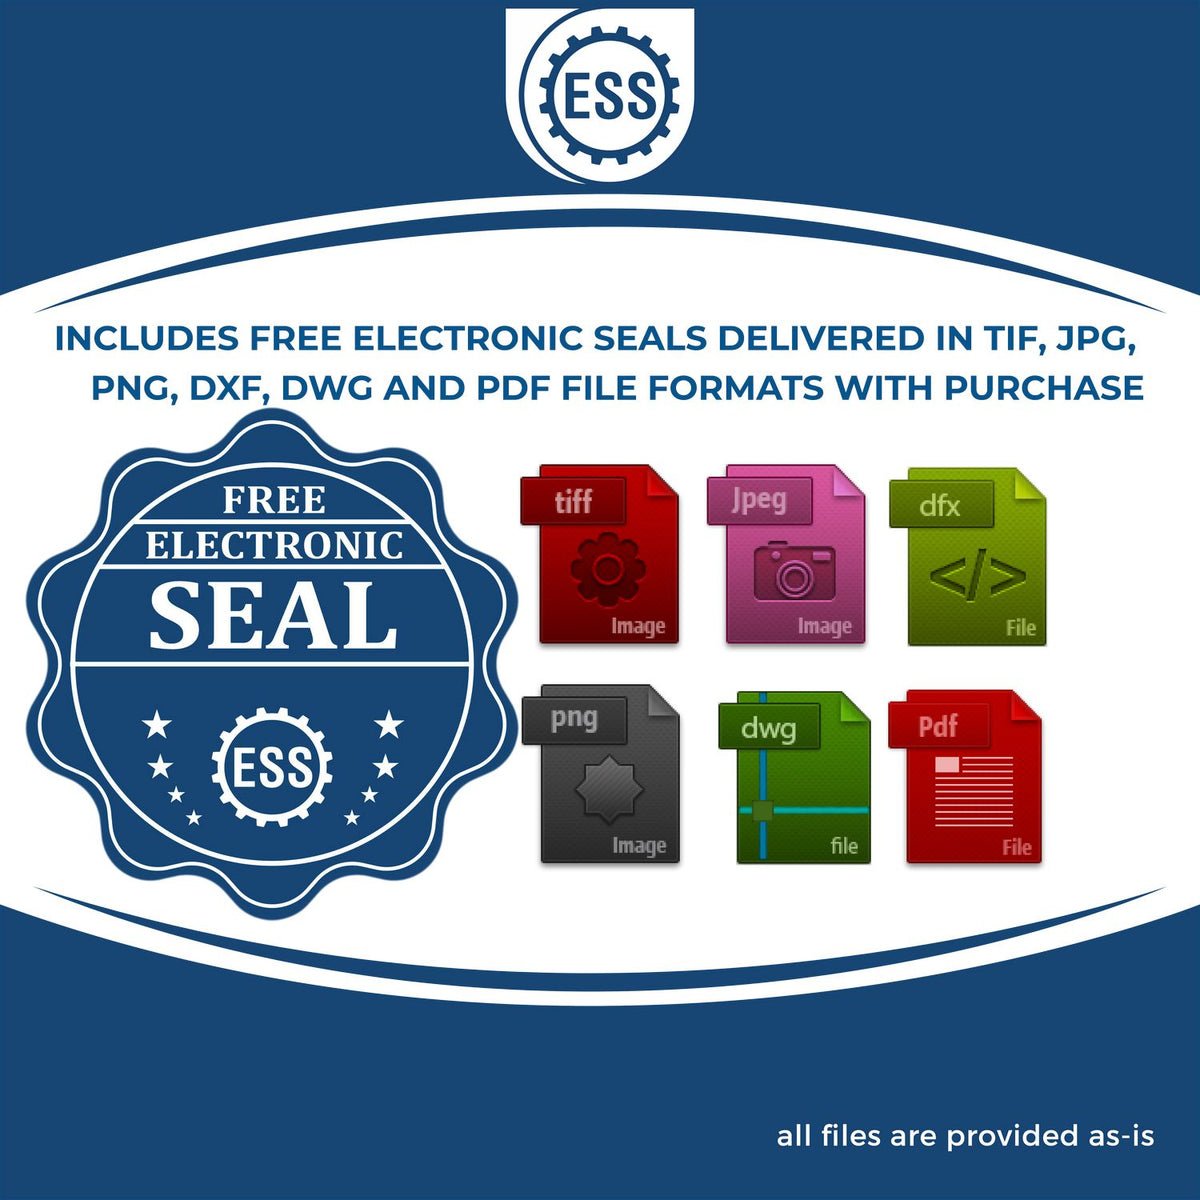 An infographic for the free electronic seal for the Slim Pre-Inked Texas Landscape Architect Seal Stamp illustrating the different file type icons such as DXF, DWG, TIF, JPG and PNG.